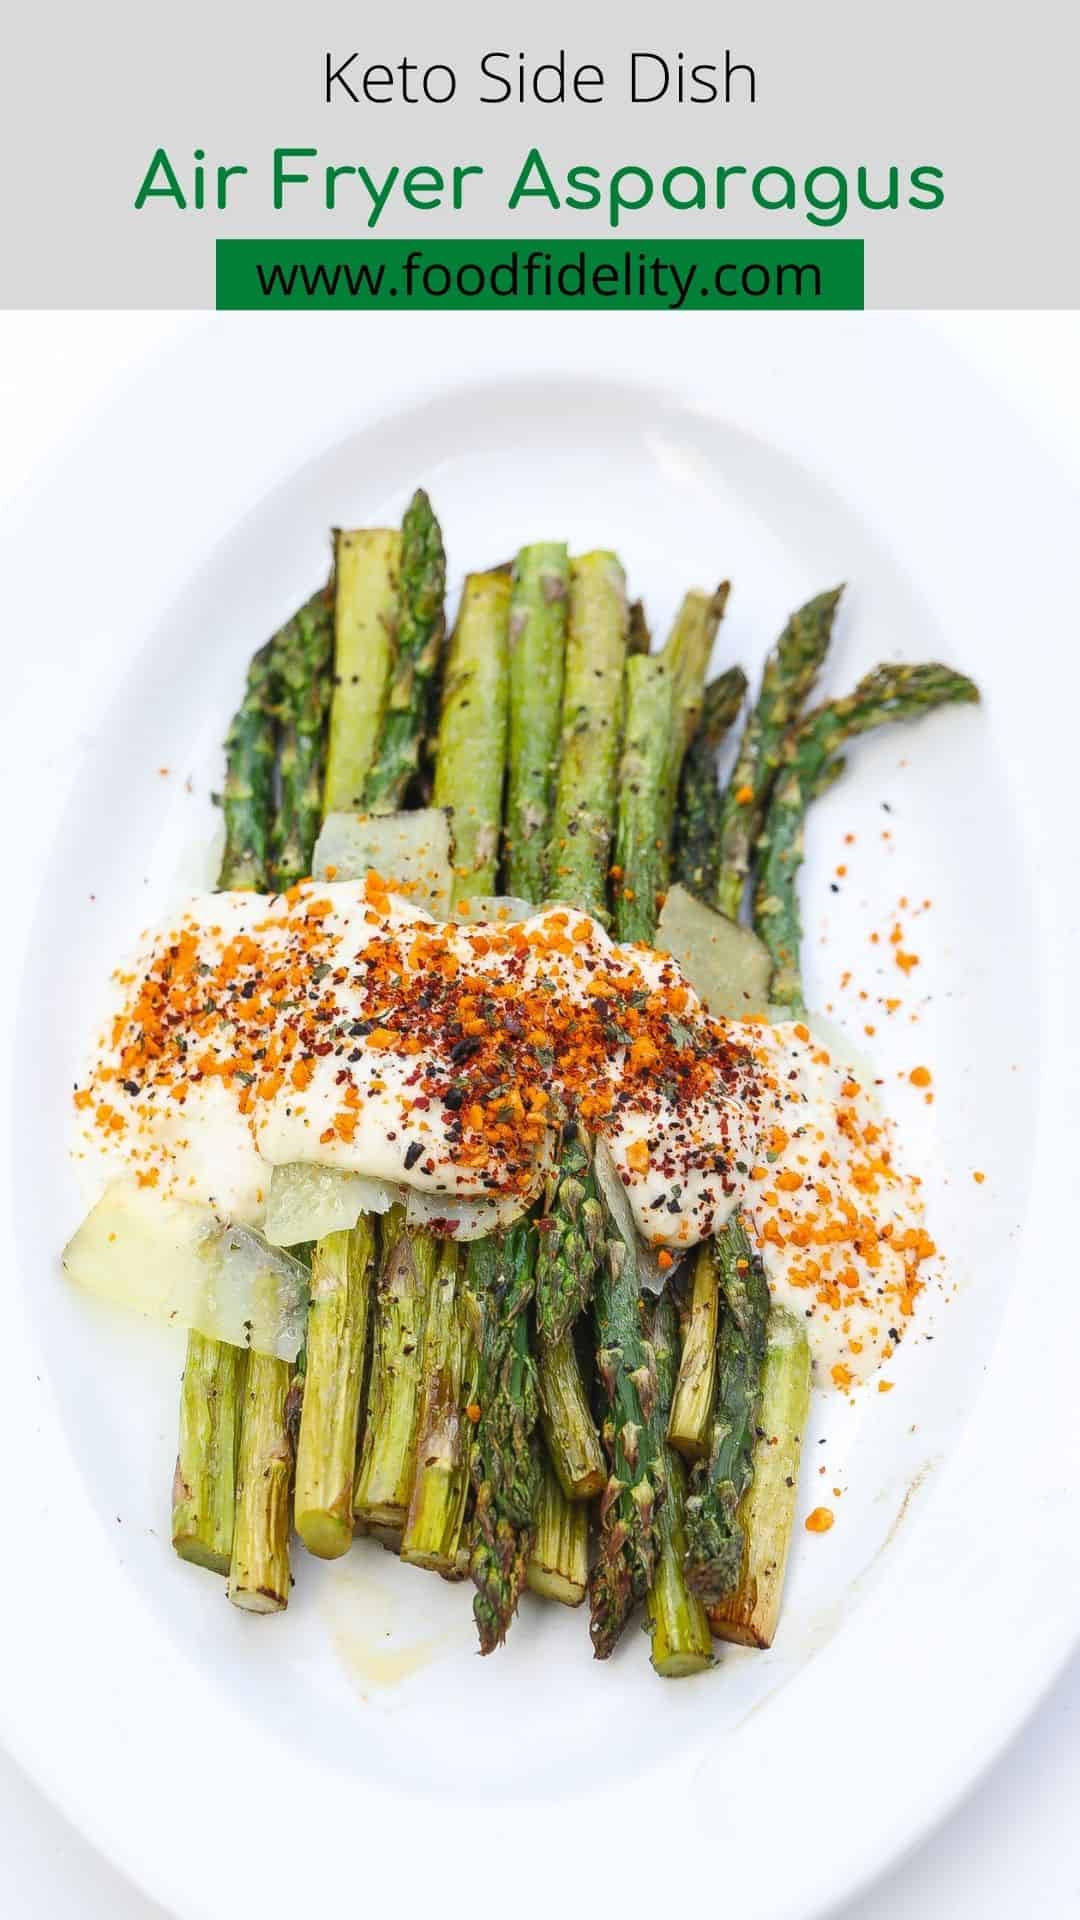 Quick Cook Air Fryer Asparagus {Recipe & Video} - Food Fidelity